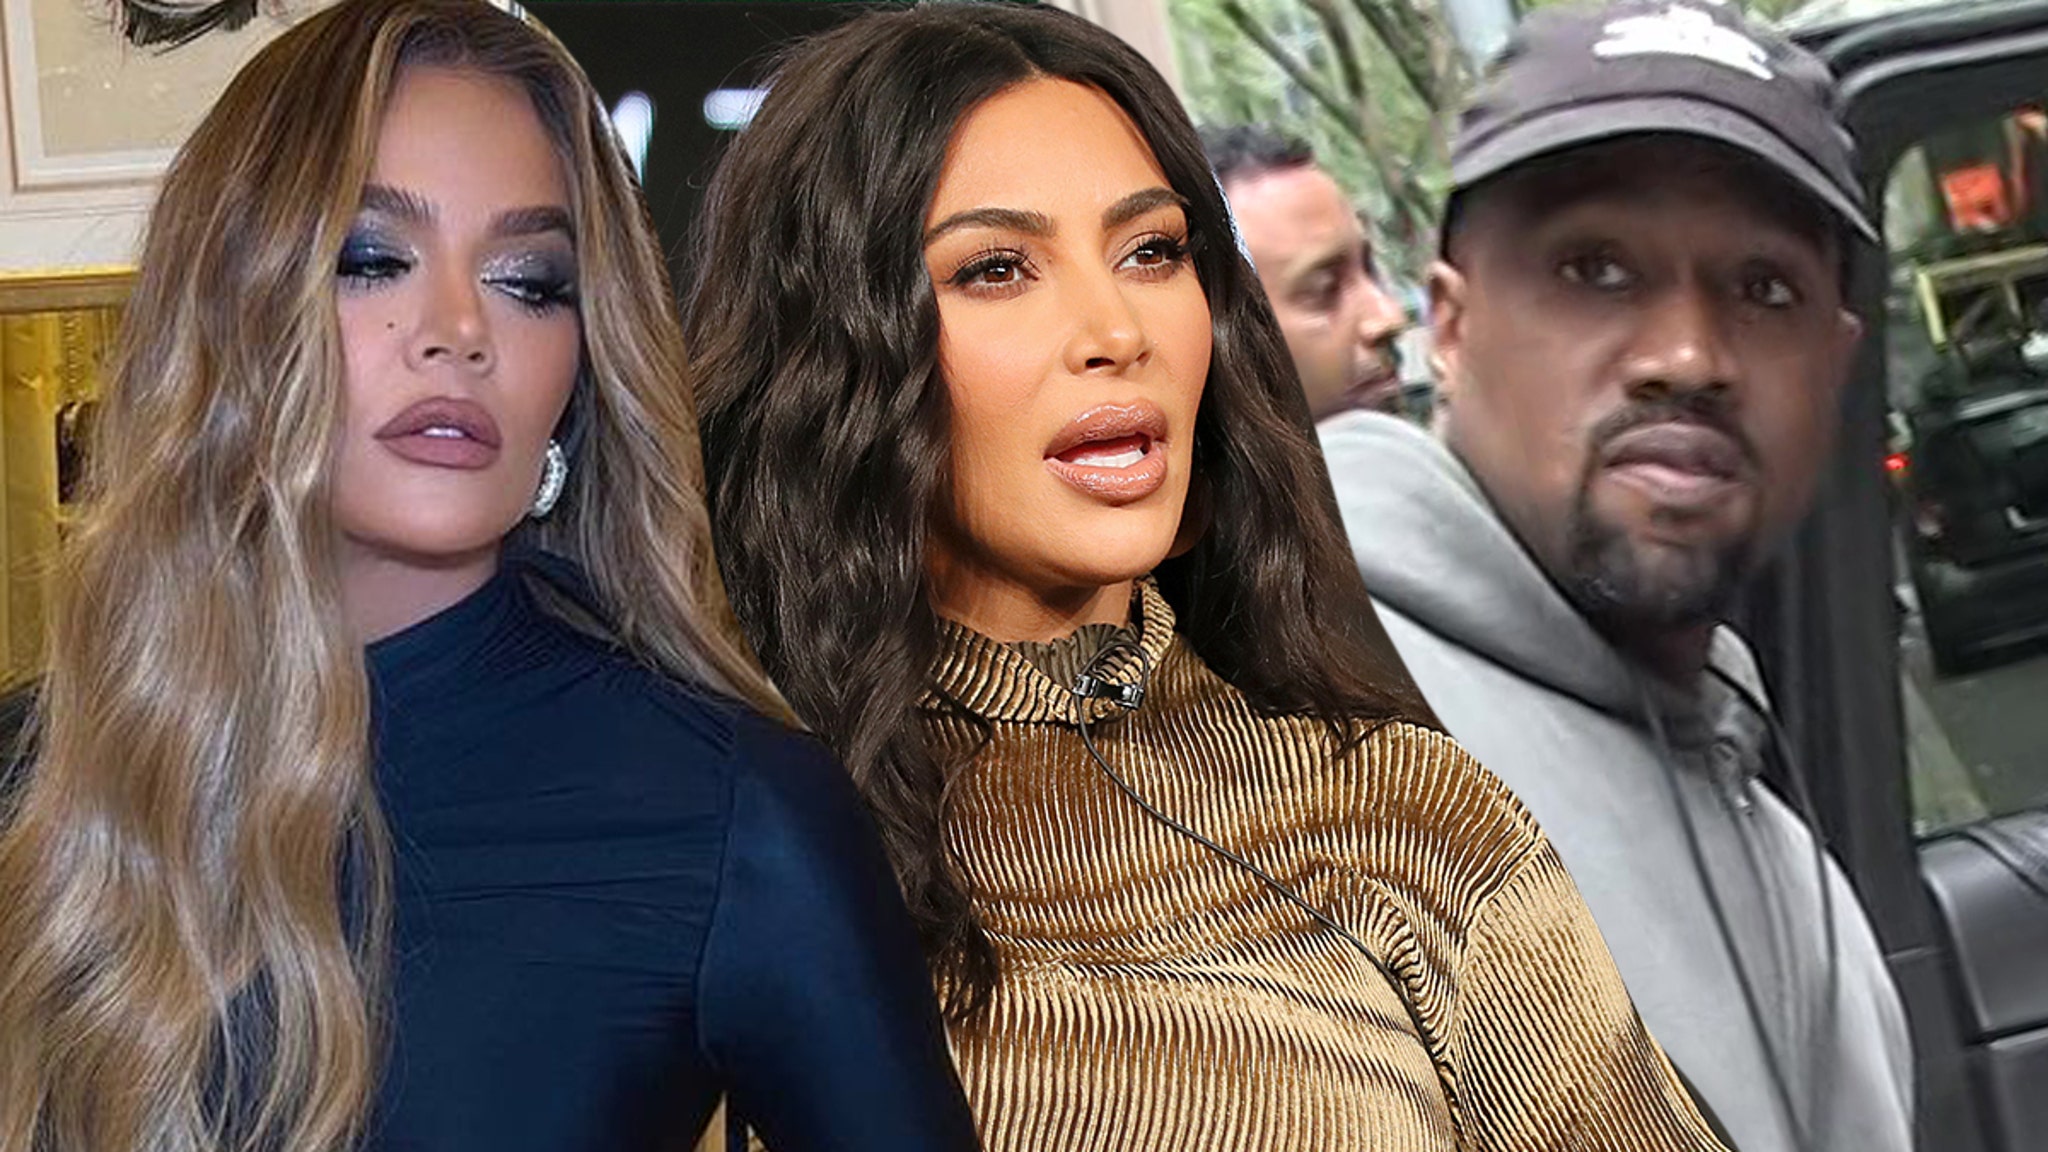 Khloe Kardashian Defends Kim Kardashian Against Kanye West, Leave Our Family Alone - TMZ : Khloe Kardashian will no longer allow Kanye West to continue to tear Kim Kardashian down, she's speaking up -- telling him to leave Kim and their family alone as he tries to defend himself for mistakes he's made.  | Tranquility 國際社群